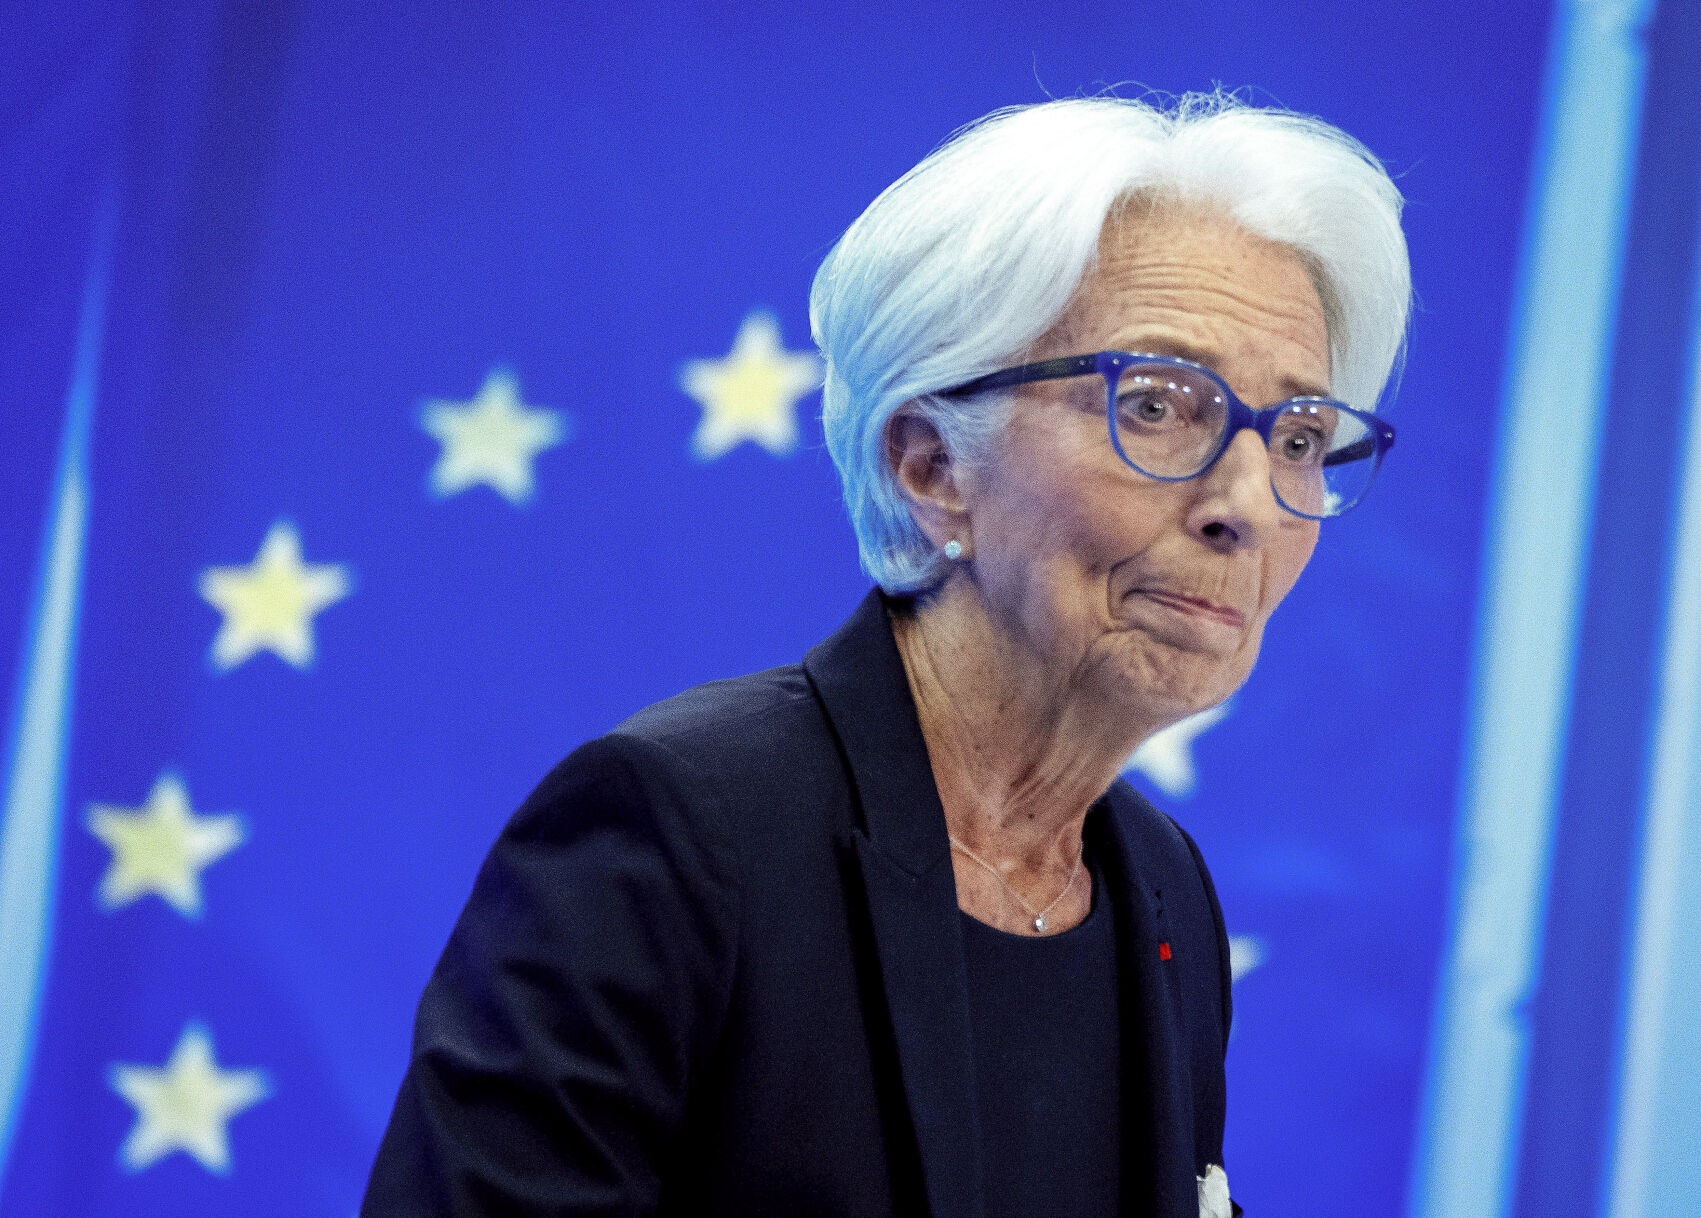 <p>FILE - Christine Lagarde, President of the European Central Bank smiles during a press conference following a meeting of the governing council in Frankfurt, Germany, Thursday, July 21, 2022. The European Central Bank is set to follow the playbook of the U.S. Federal Reserve in making its second big interest rate increase in a row on Thursday, underlining its determination to stamp out the record inflation that threatens to sink the 19-country euro area into recession. (AP Photo/Michael Probst, File)</p>   PHOTO CREDIT: Michael Probst - staff, AP